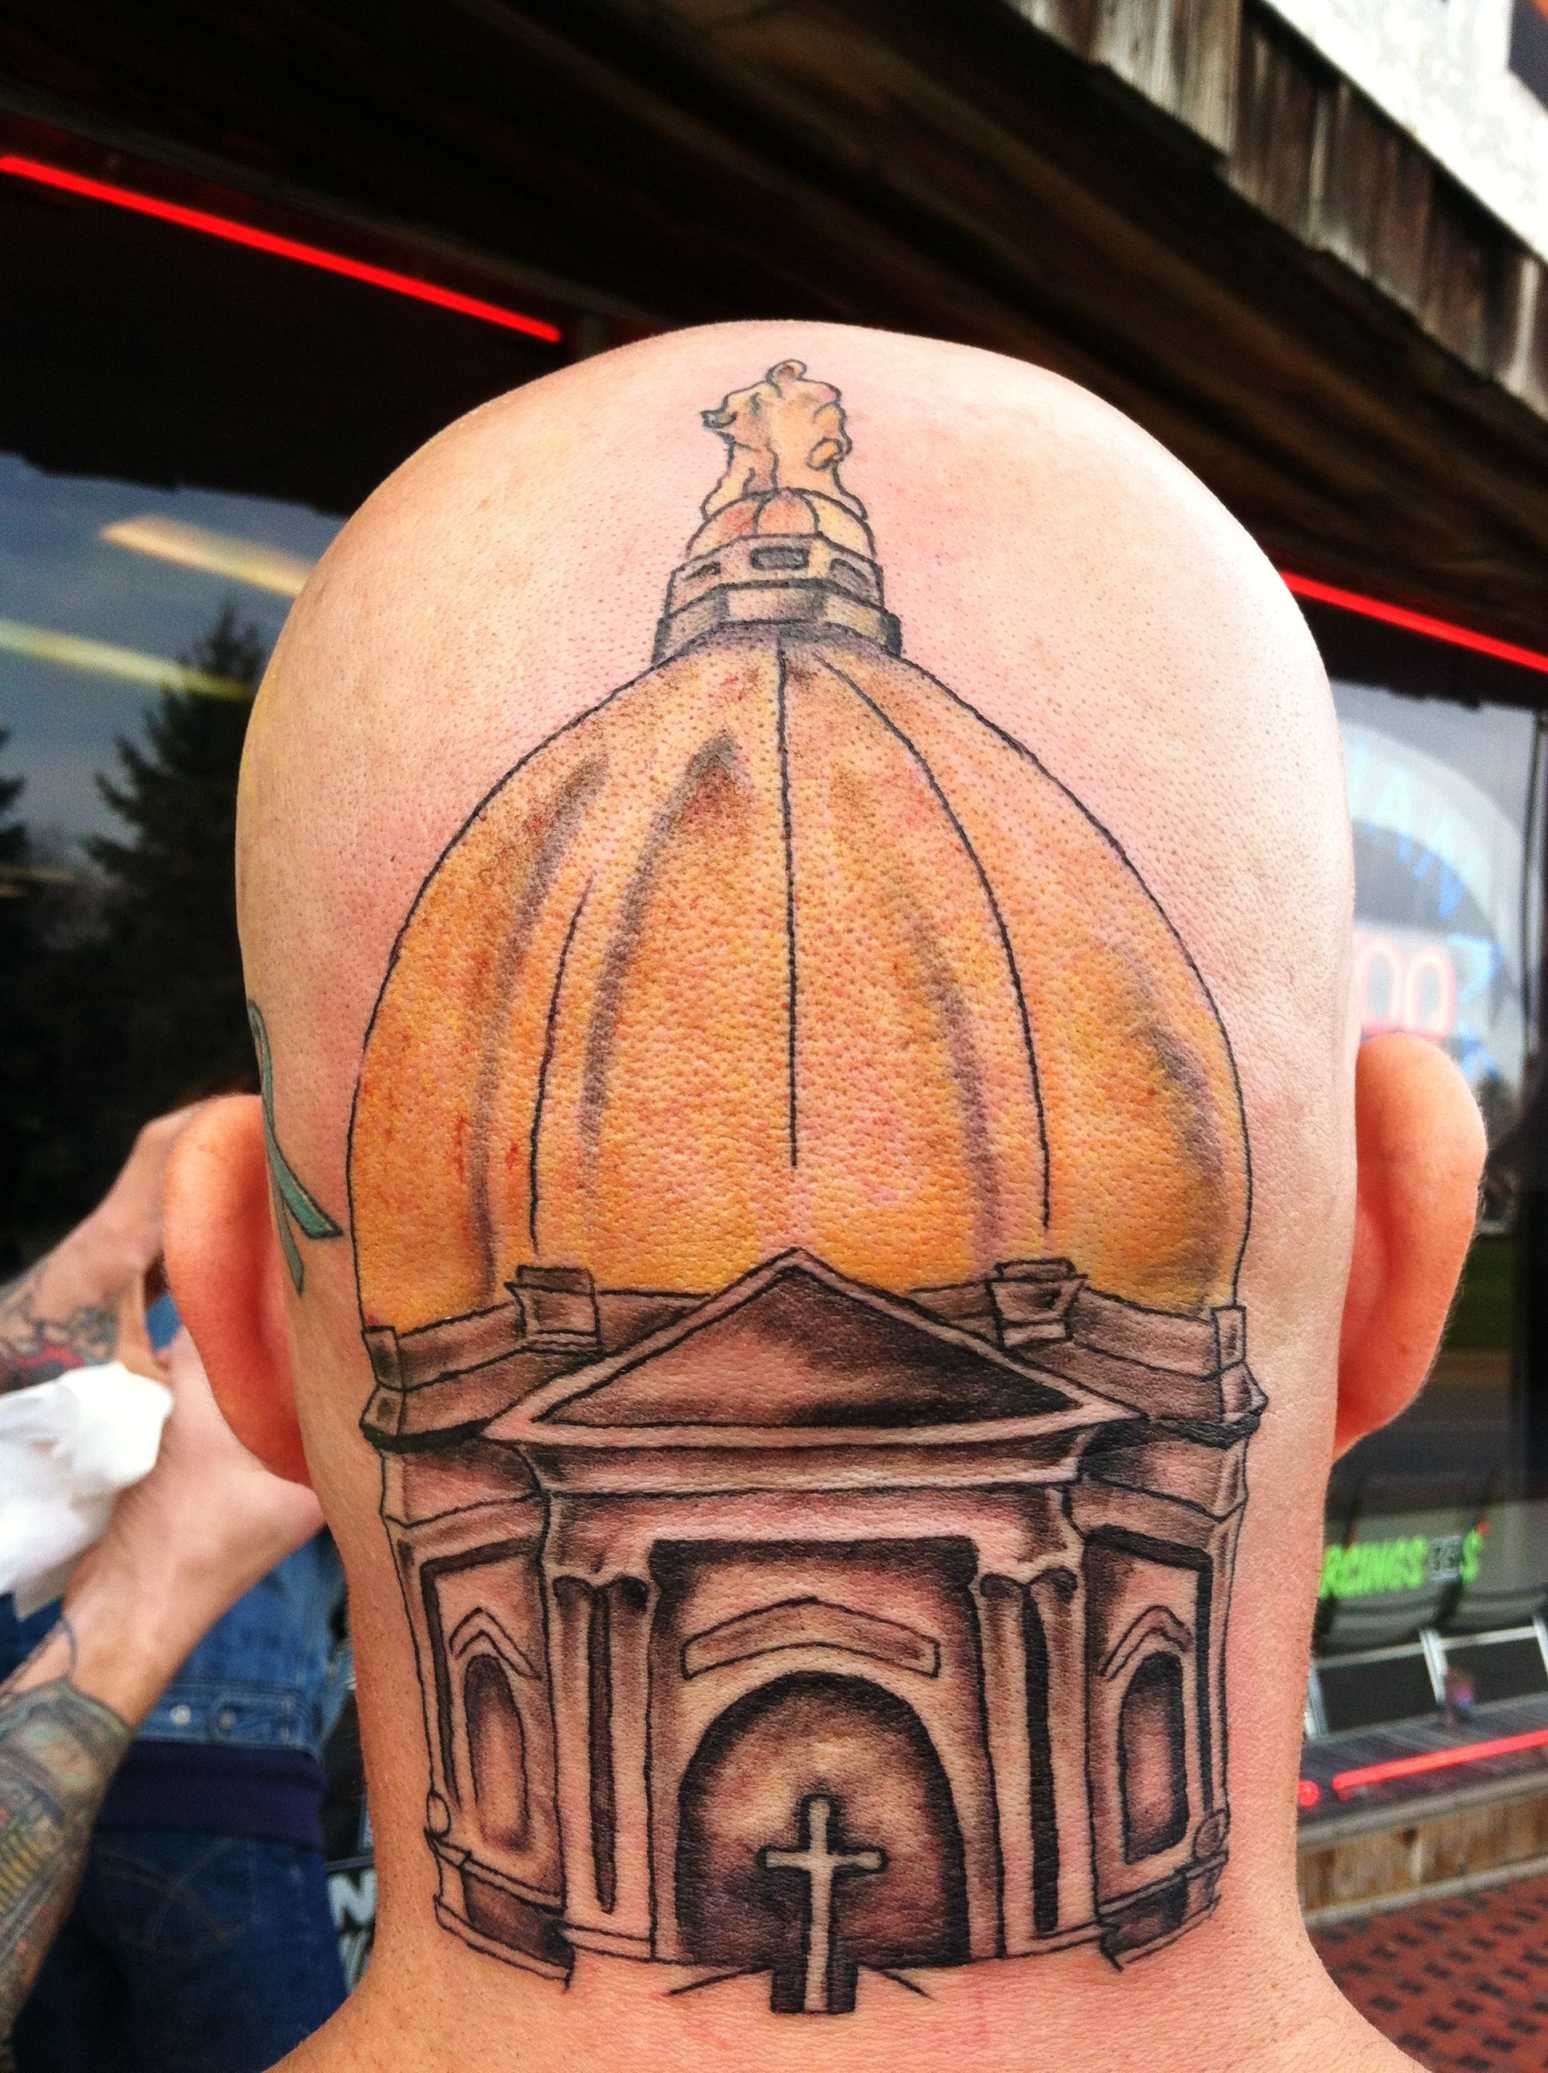 Now this is a real Notre Dame Fan !!! Golden Dome Tattoo